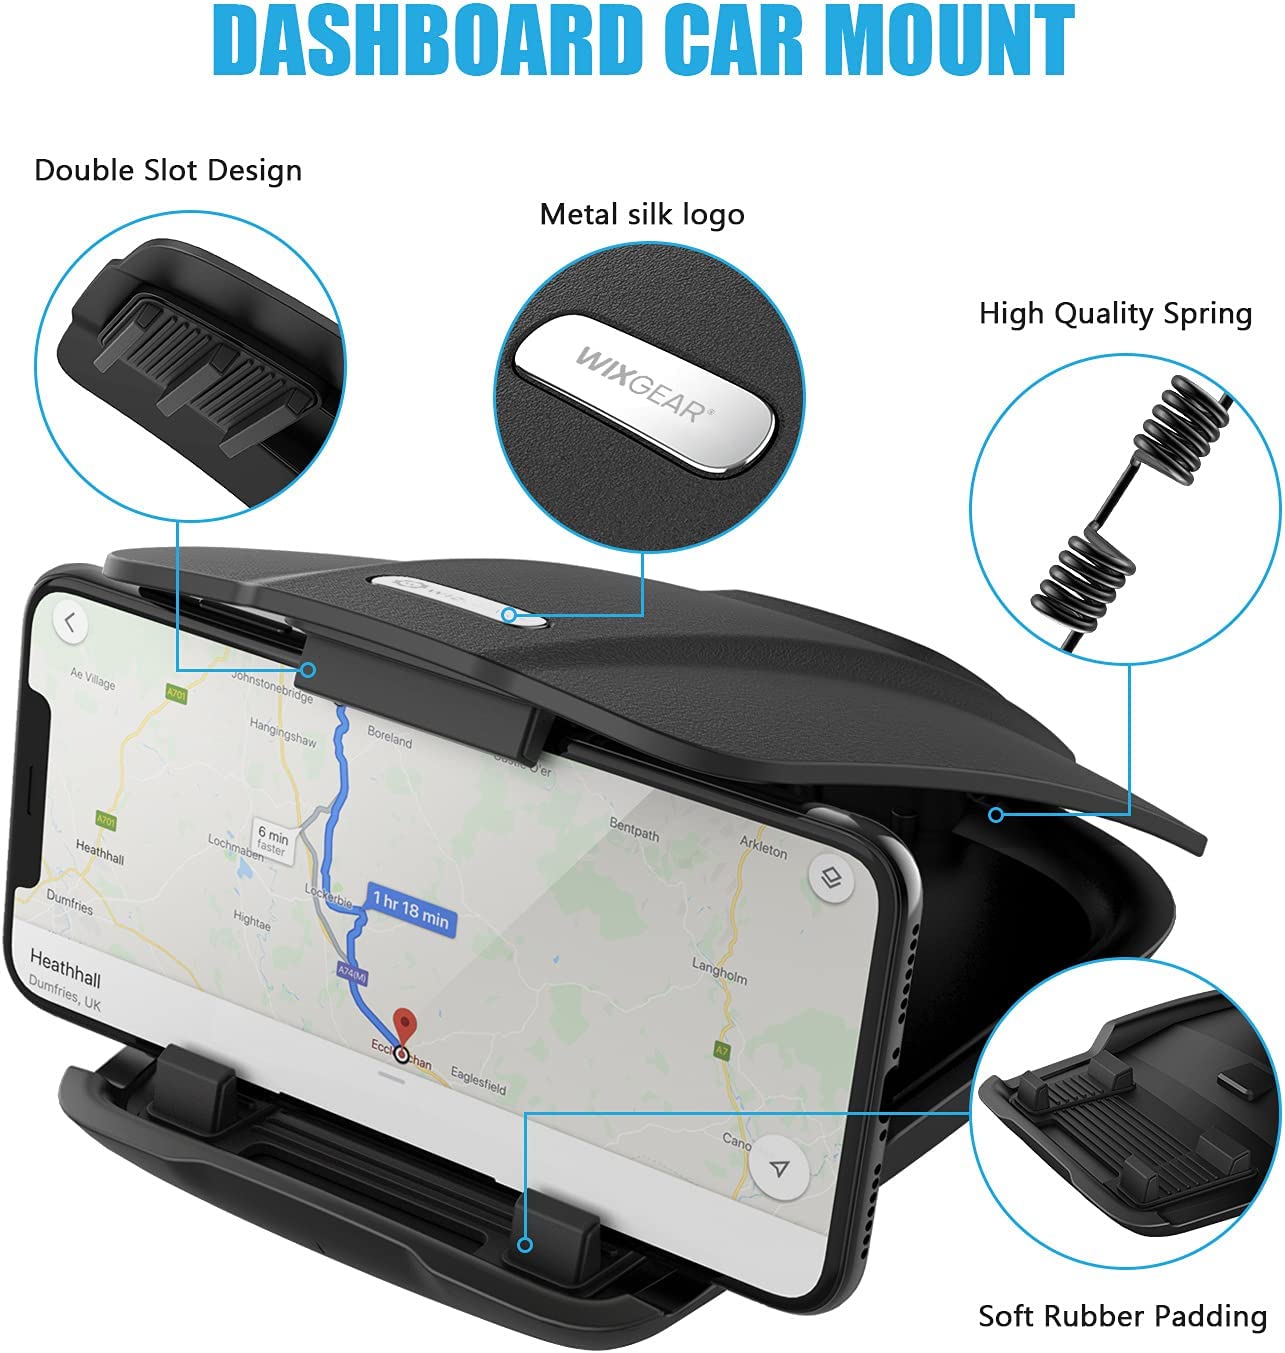 WixGear Car Phone Mount, Dashboard Cell Phone Holder, Dash Mount Cell Phone Holder for Smartphone, Mobile Phone Car Mat Pad for All Smartphones